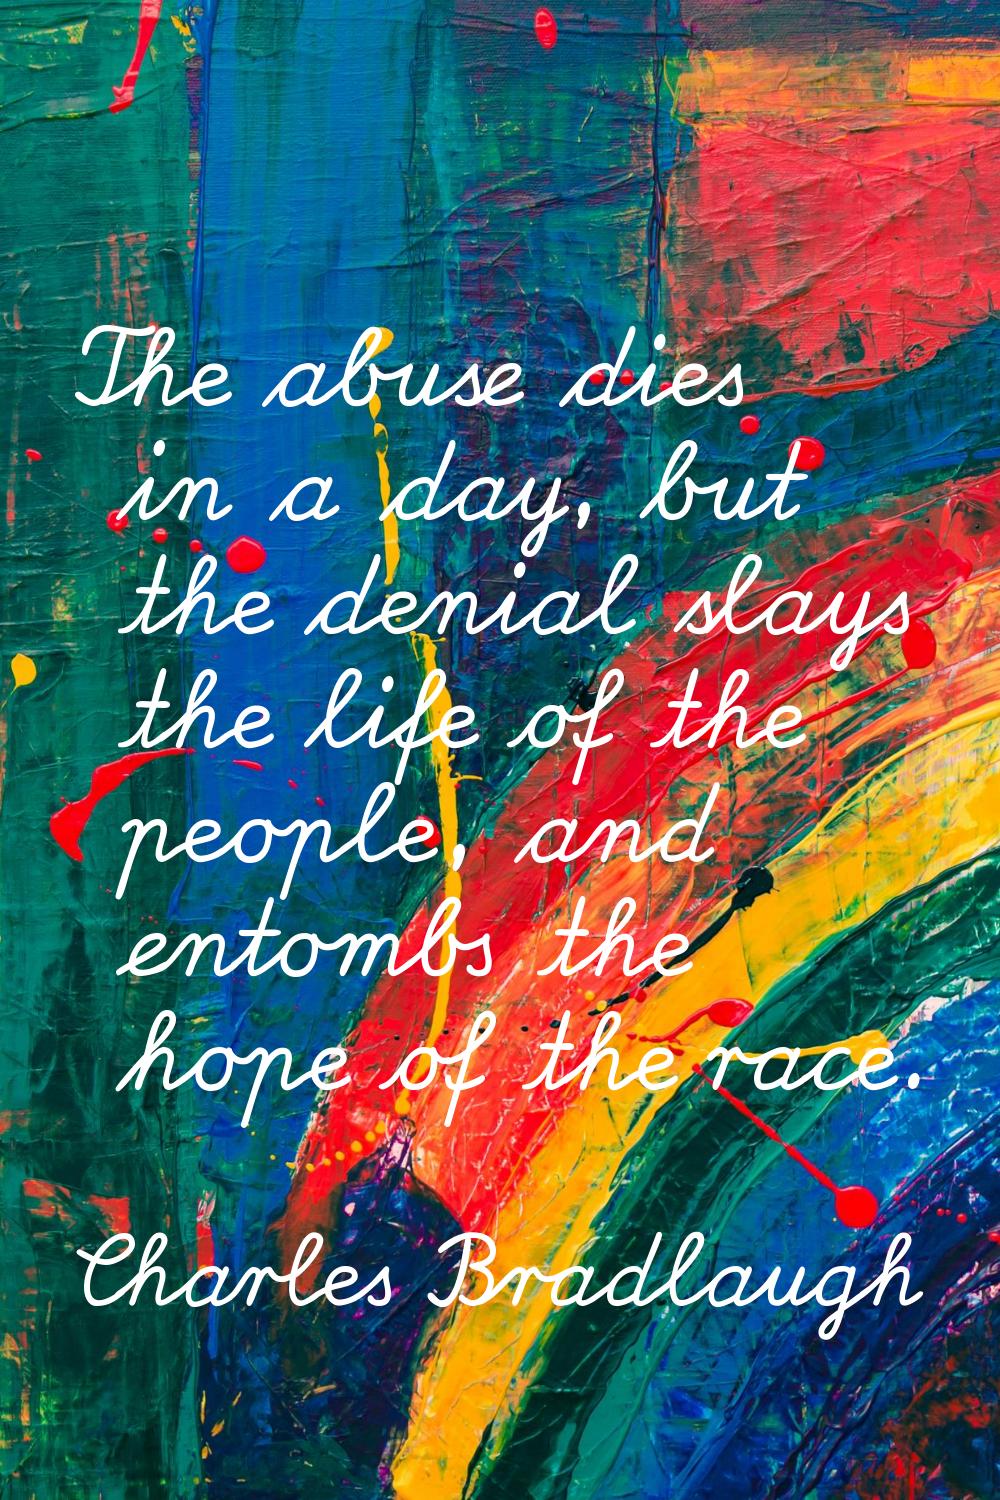 The abuse dies in a day, but the denial slays the life of the people, and entombs the hope of the r